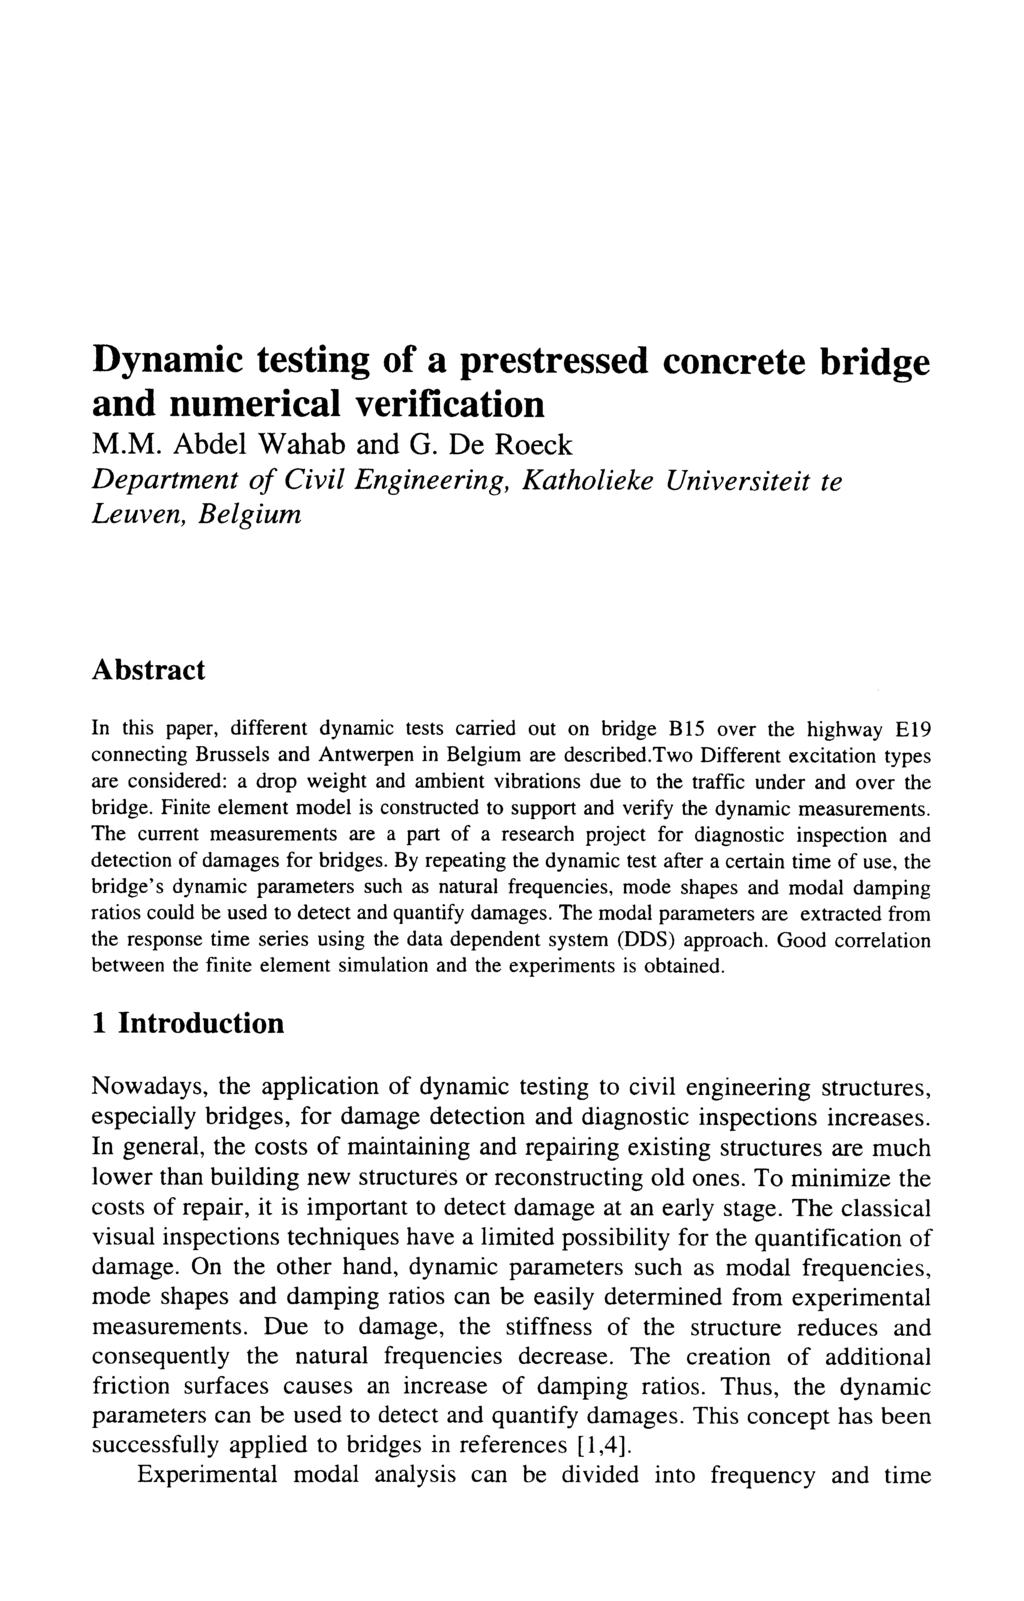 Dynamic testing of a prestressed concrete bridge and numerical verification M.M. Abdel Wahab and G.